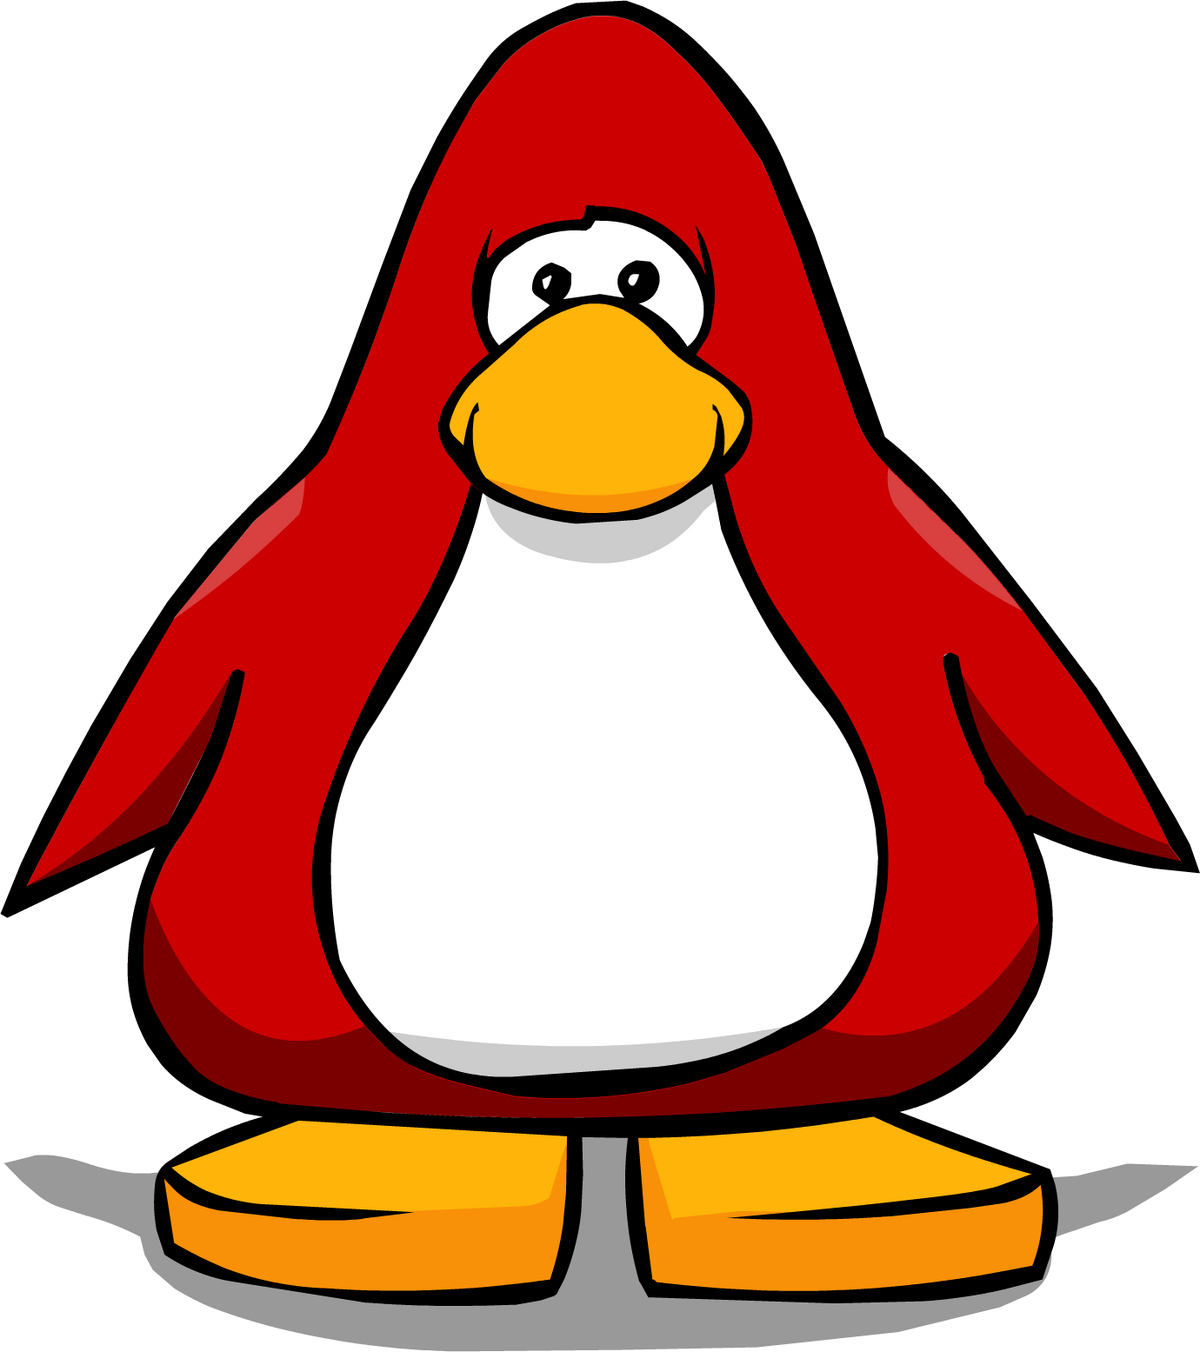 Club Penguin - Red X Background - CleanPNG / KissPNG